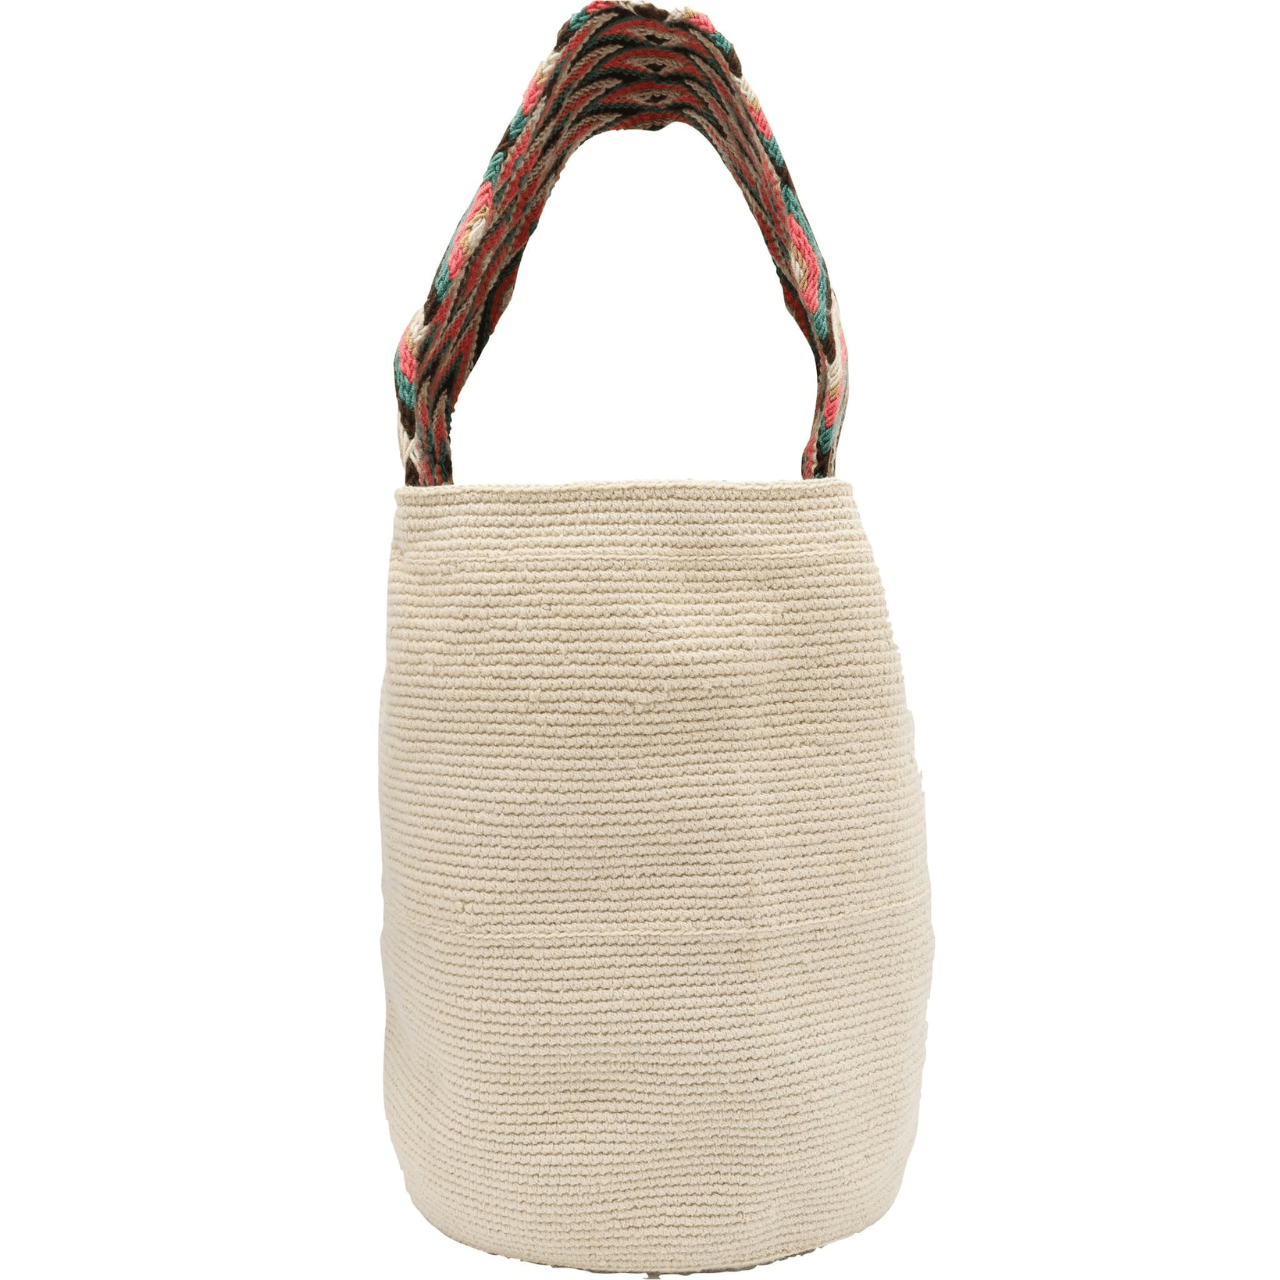 Handcrafted Hakira Crochet Bag with Short Macramé Handle and Beige Body – Uniquely Designed Crochet Bag with Distinctive Aesthetics